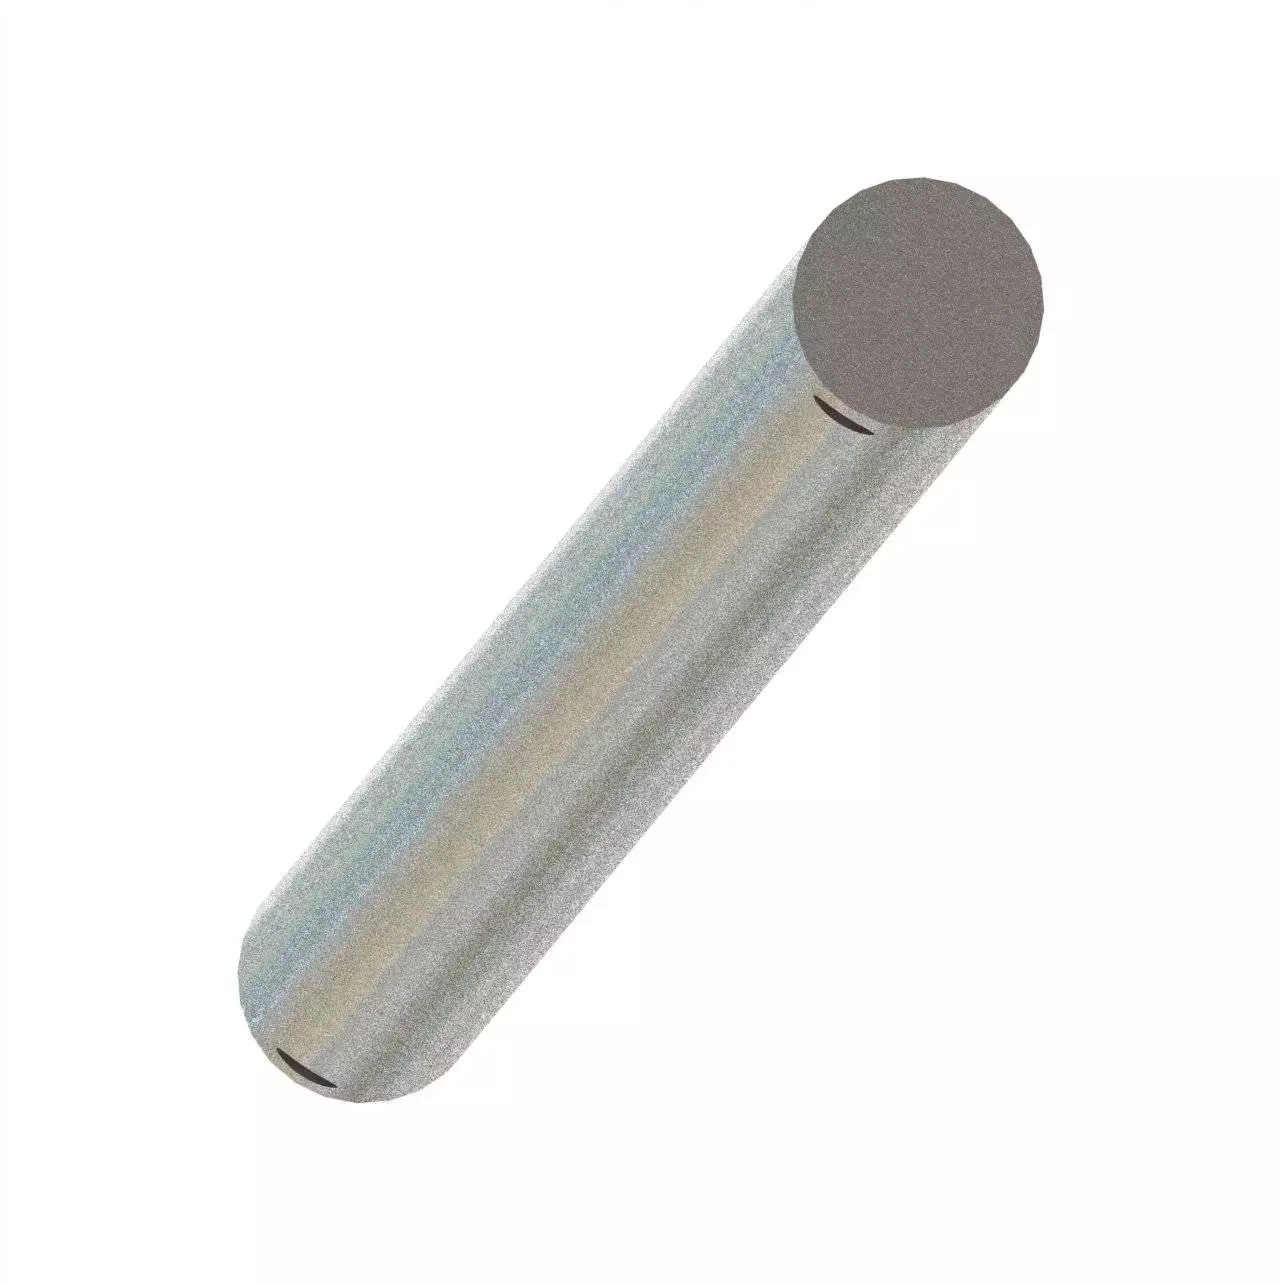 JD Adjustable Spout Round Pin - 11-1/2"